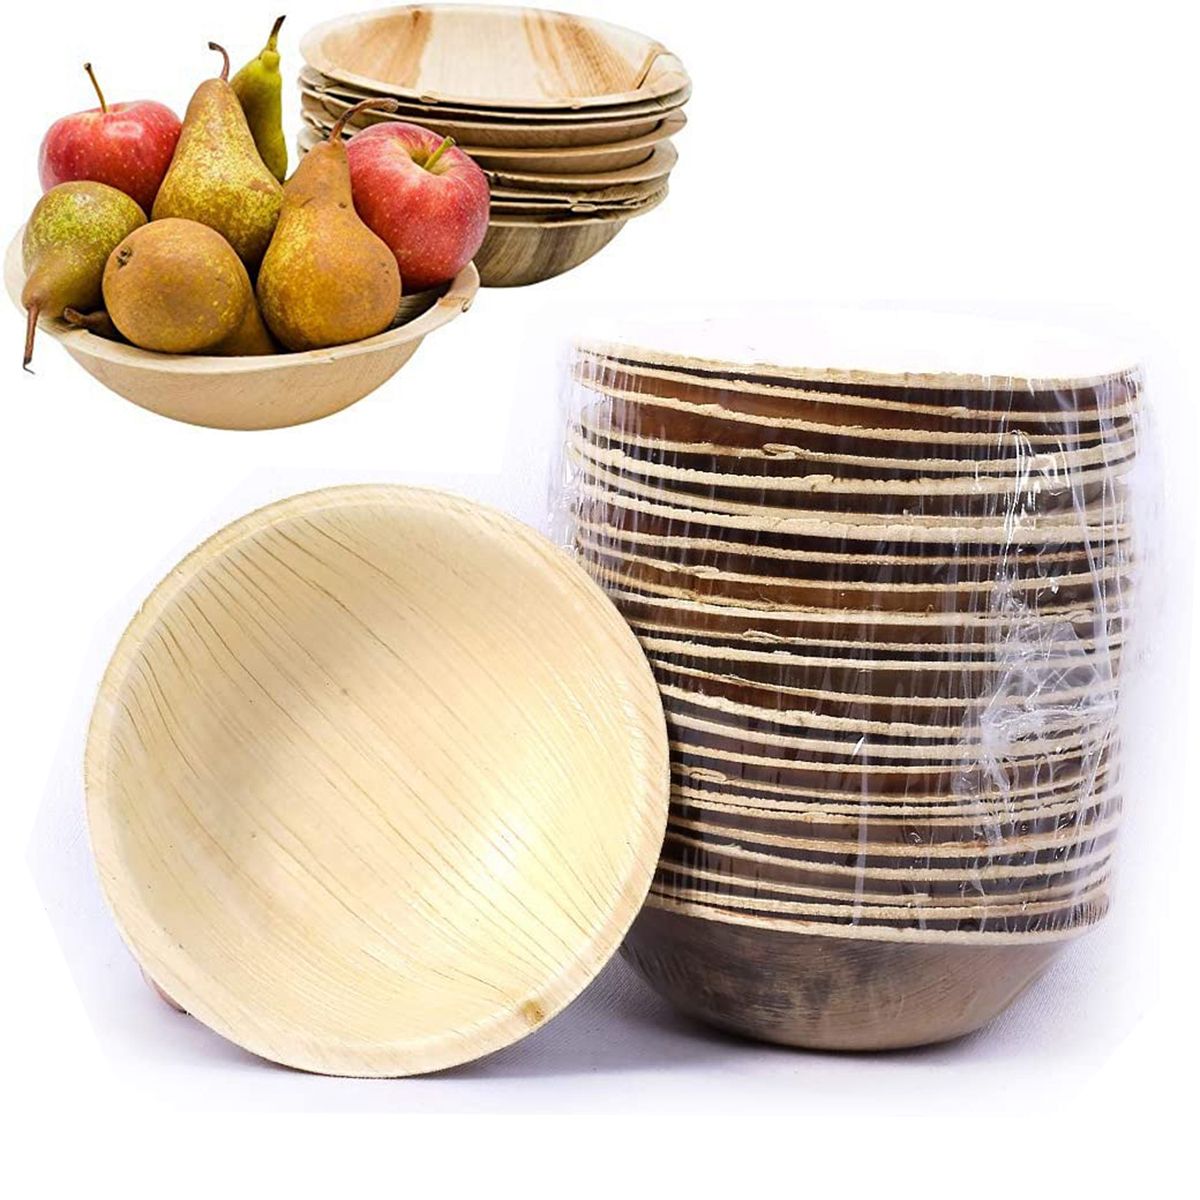 Disposable Plates Palm Leaf Dishes Wedding Party Picnic Wooden Serving Trays Round Square Sushi/Salad/Dessert Bowl